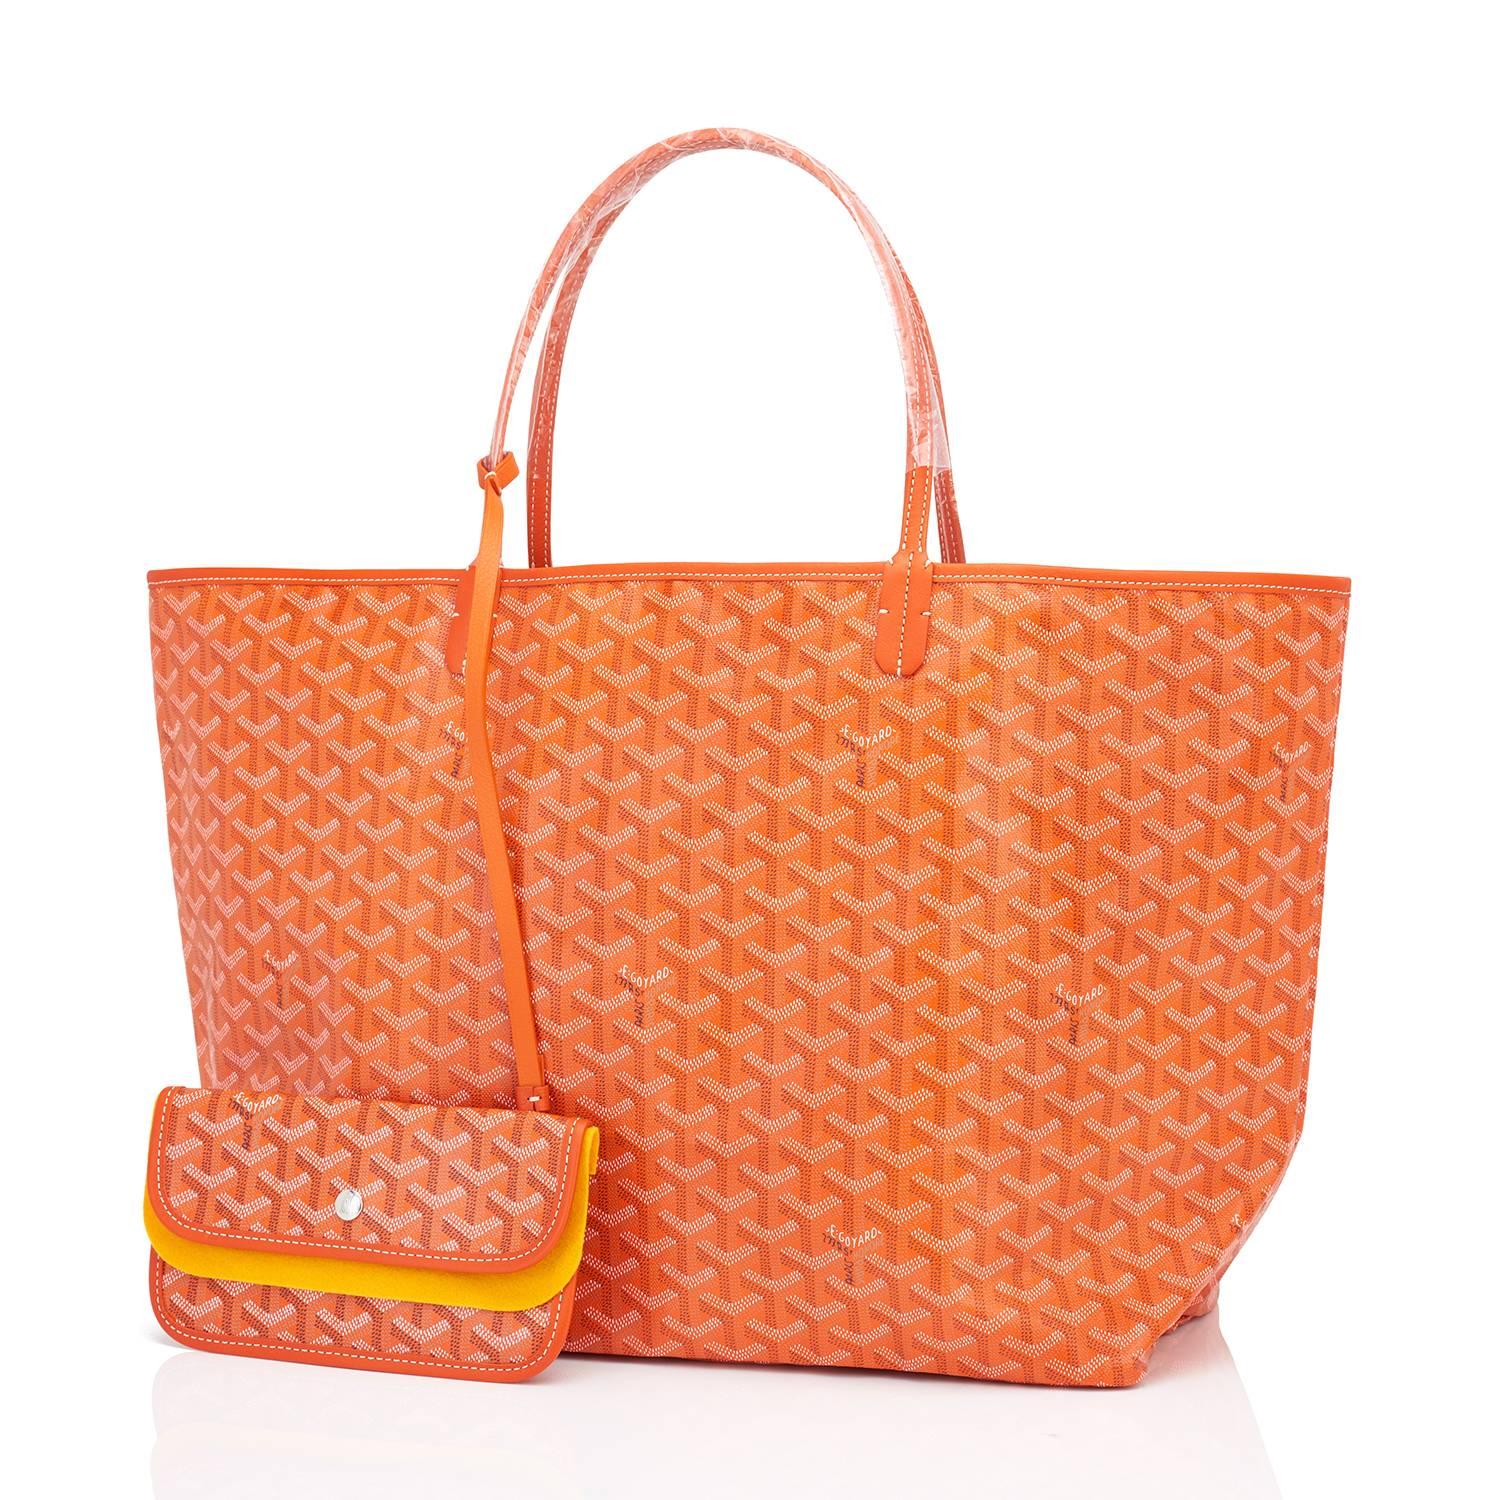 Goyard Orange St Louis GM Chevron Tote Bag 
Just purchased from store!
Brand New. Store Fresh. Pristine Condition (with plastic on handles) 
Perfect gift! Comes with yellow Goyard sleeper, inner organizational pochette, and yellow protective